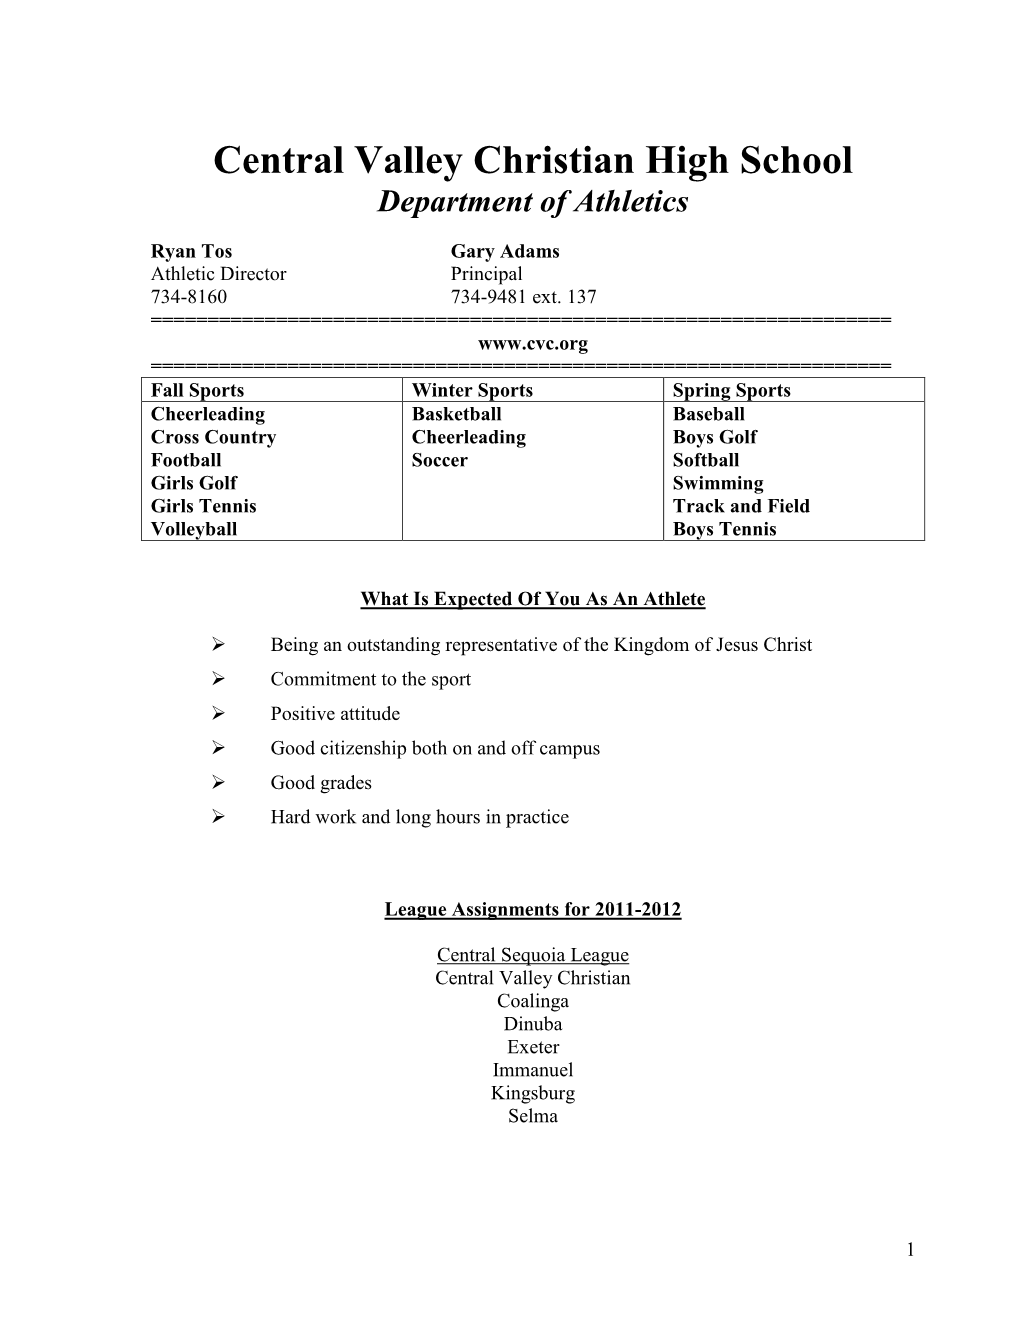 Central Valley Christian High School Department of Athletics